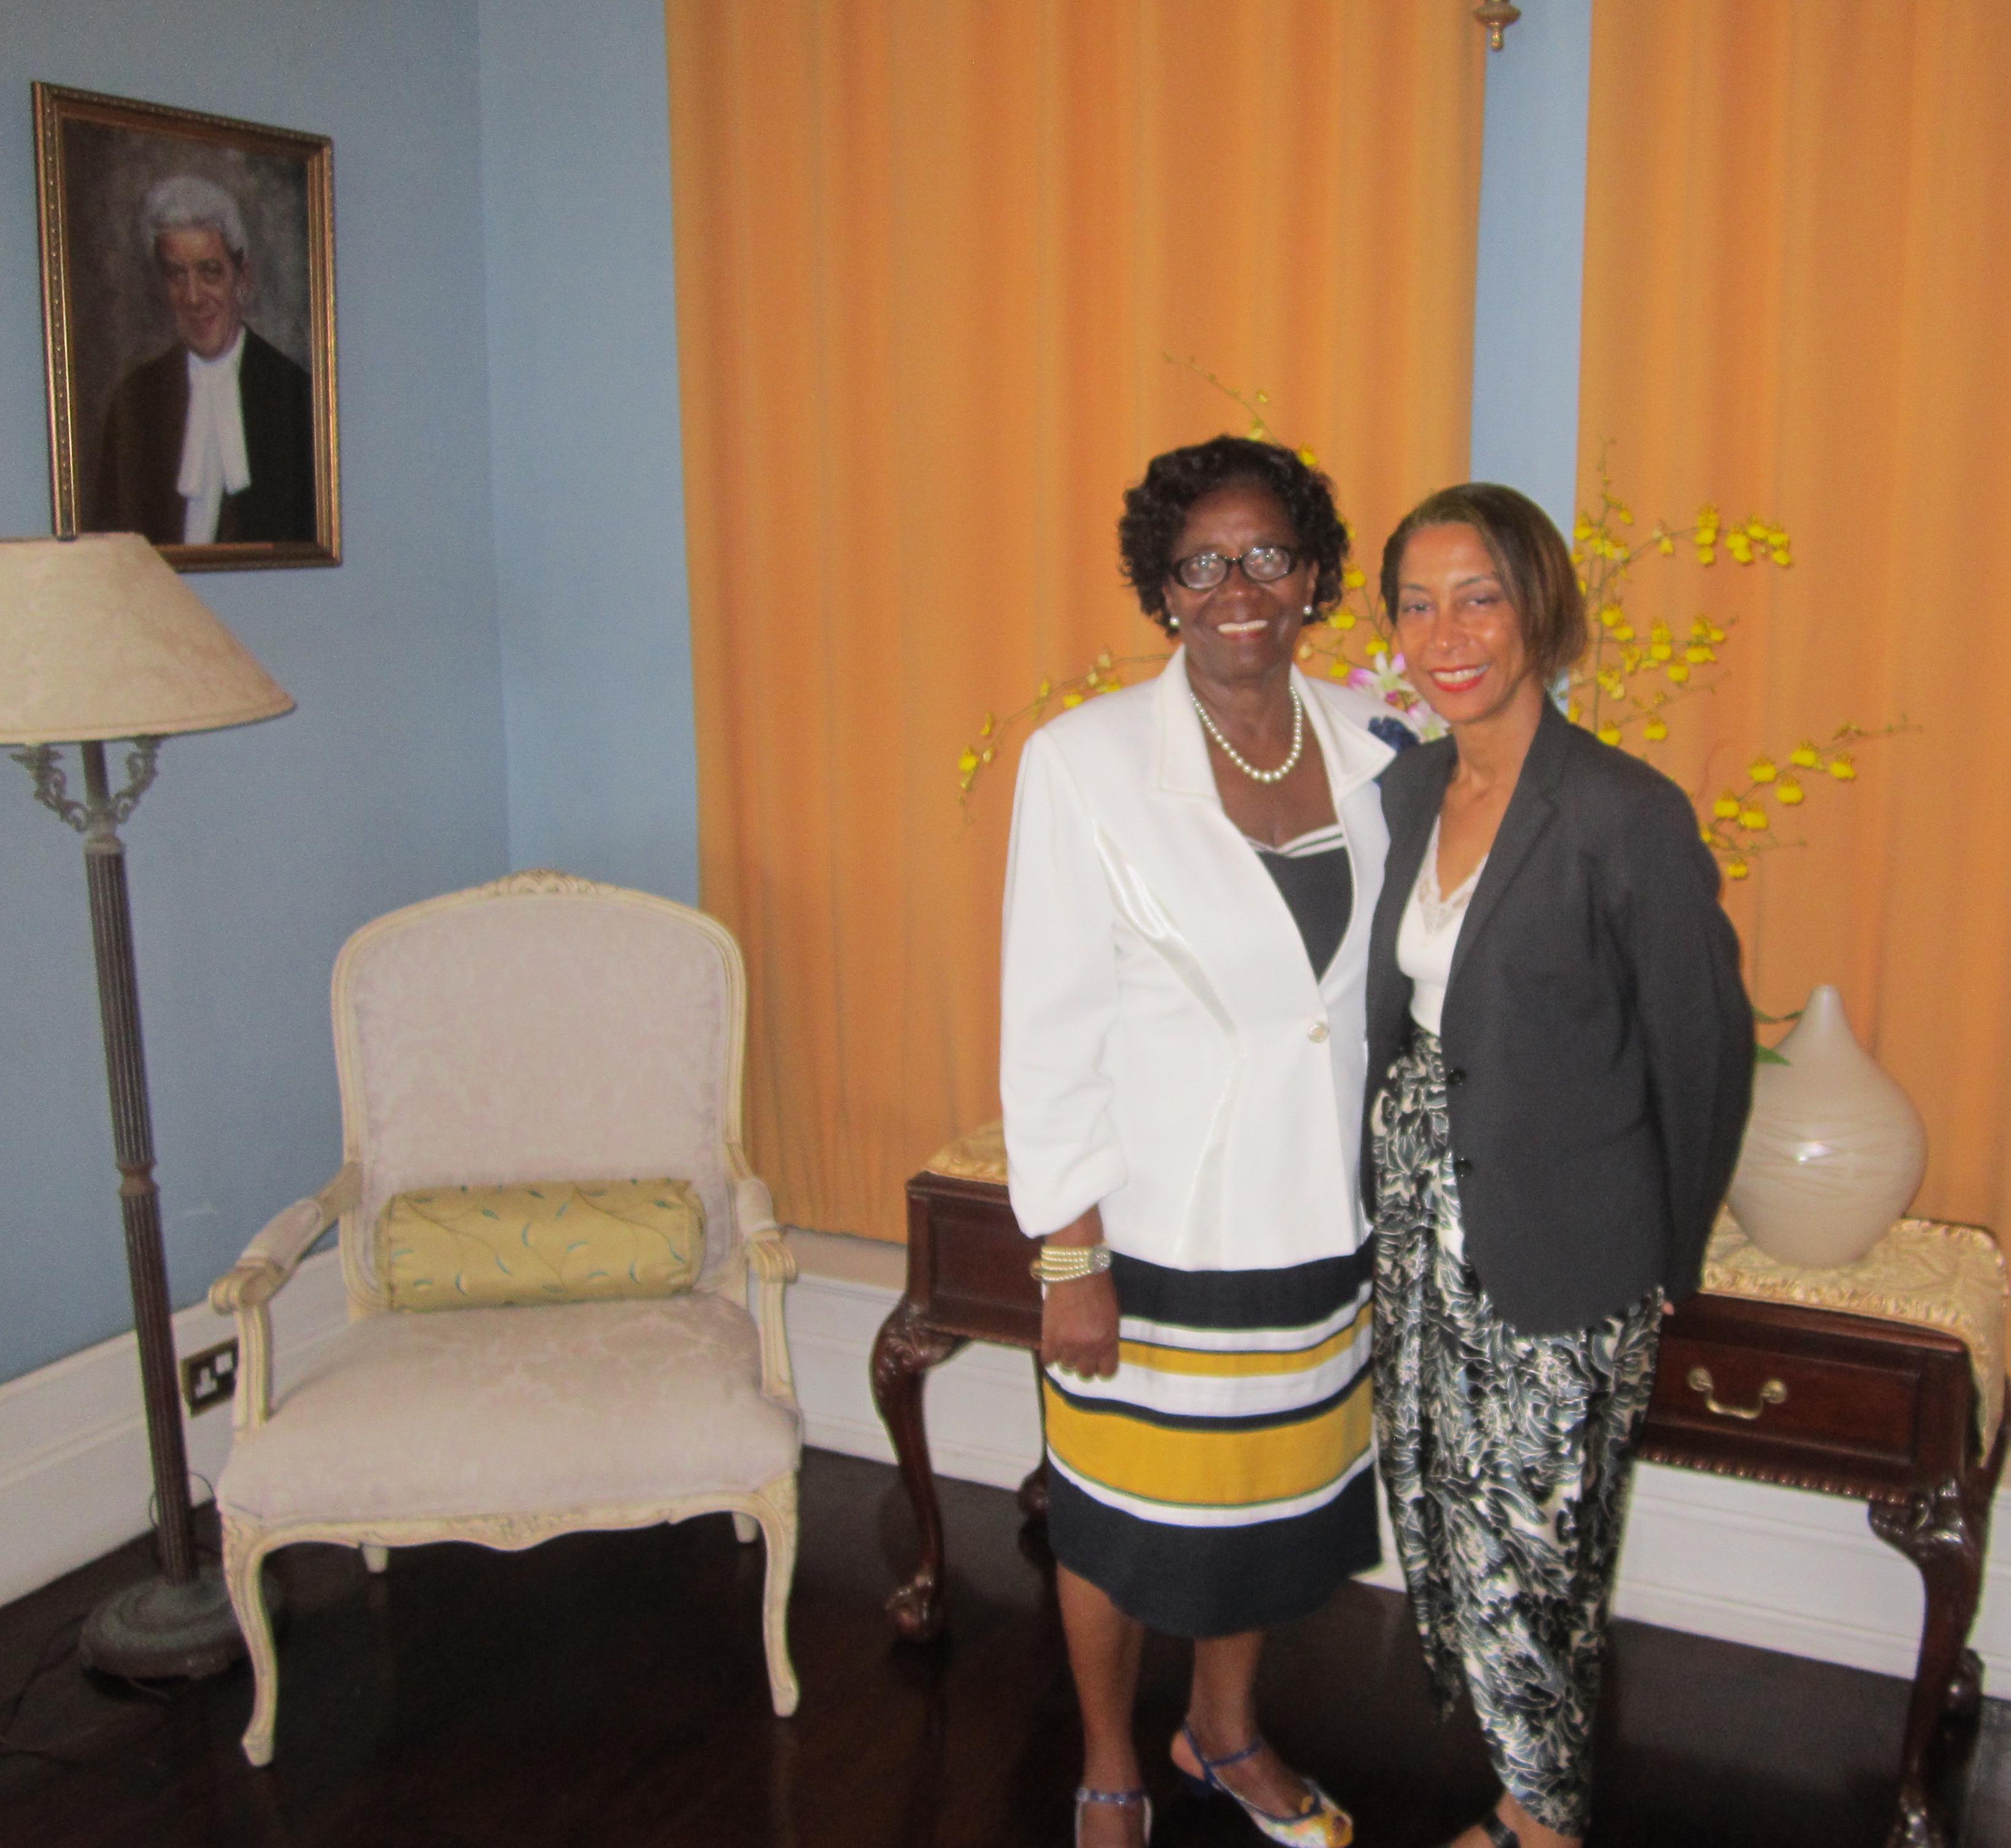 OAS Representative -Farewell Audience with Saint Lucia's Governor-General(August 22, 2013)